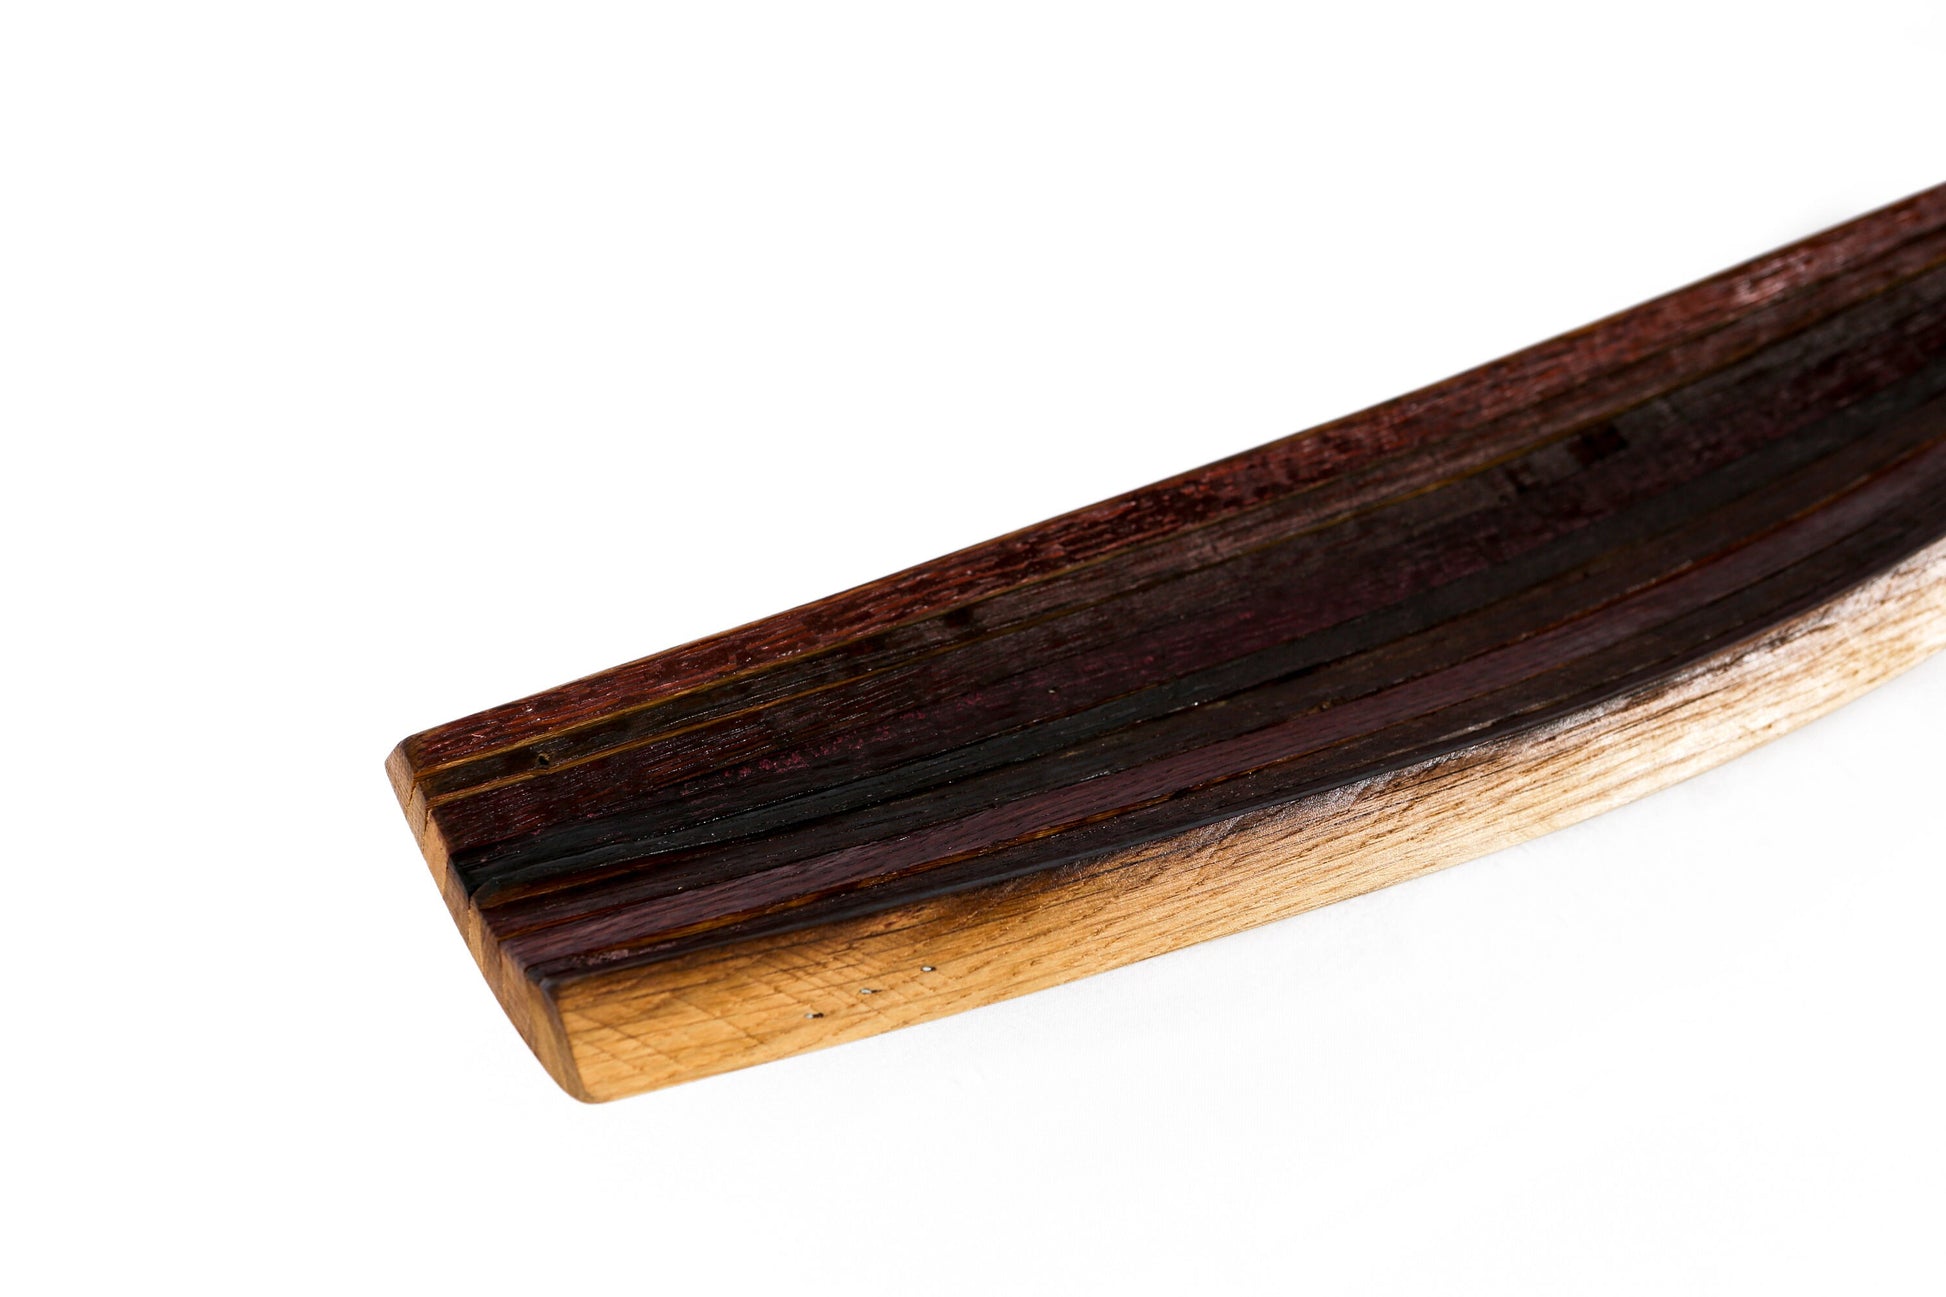 Barrel Stave Display Tray - Katra - Made from retired California wine barrels. 100% Recycled!